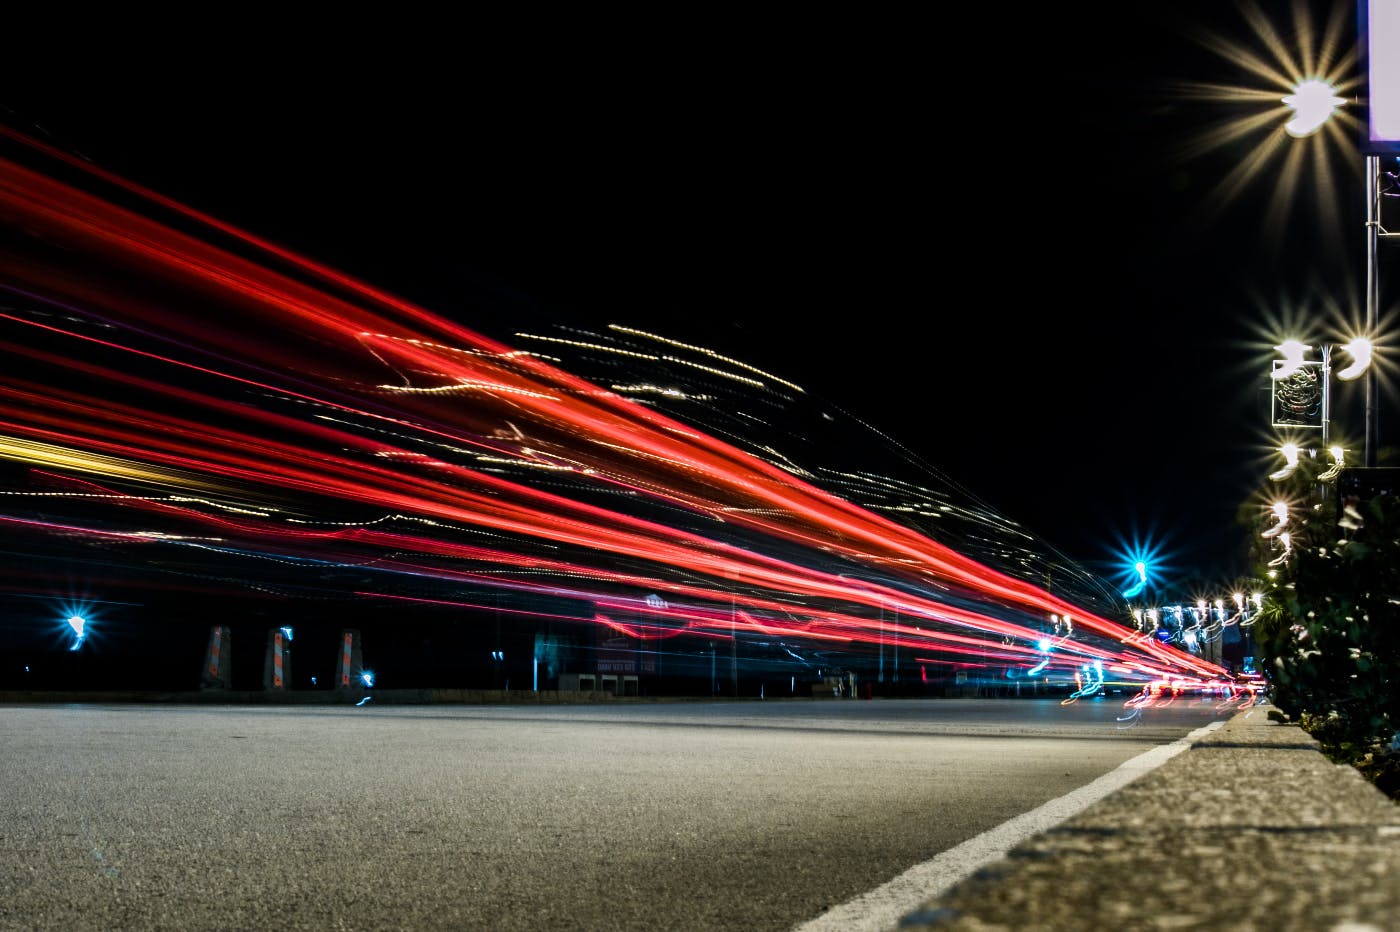 Cars appear as streaks of light in this night time photo of a highway